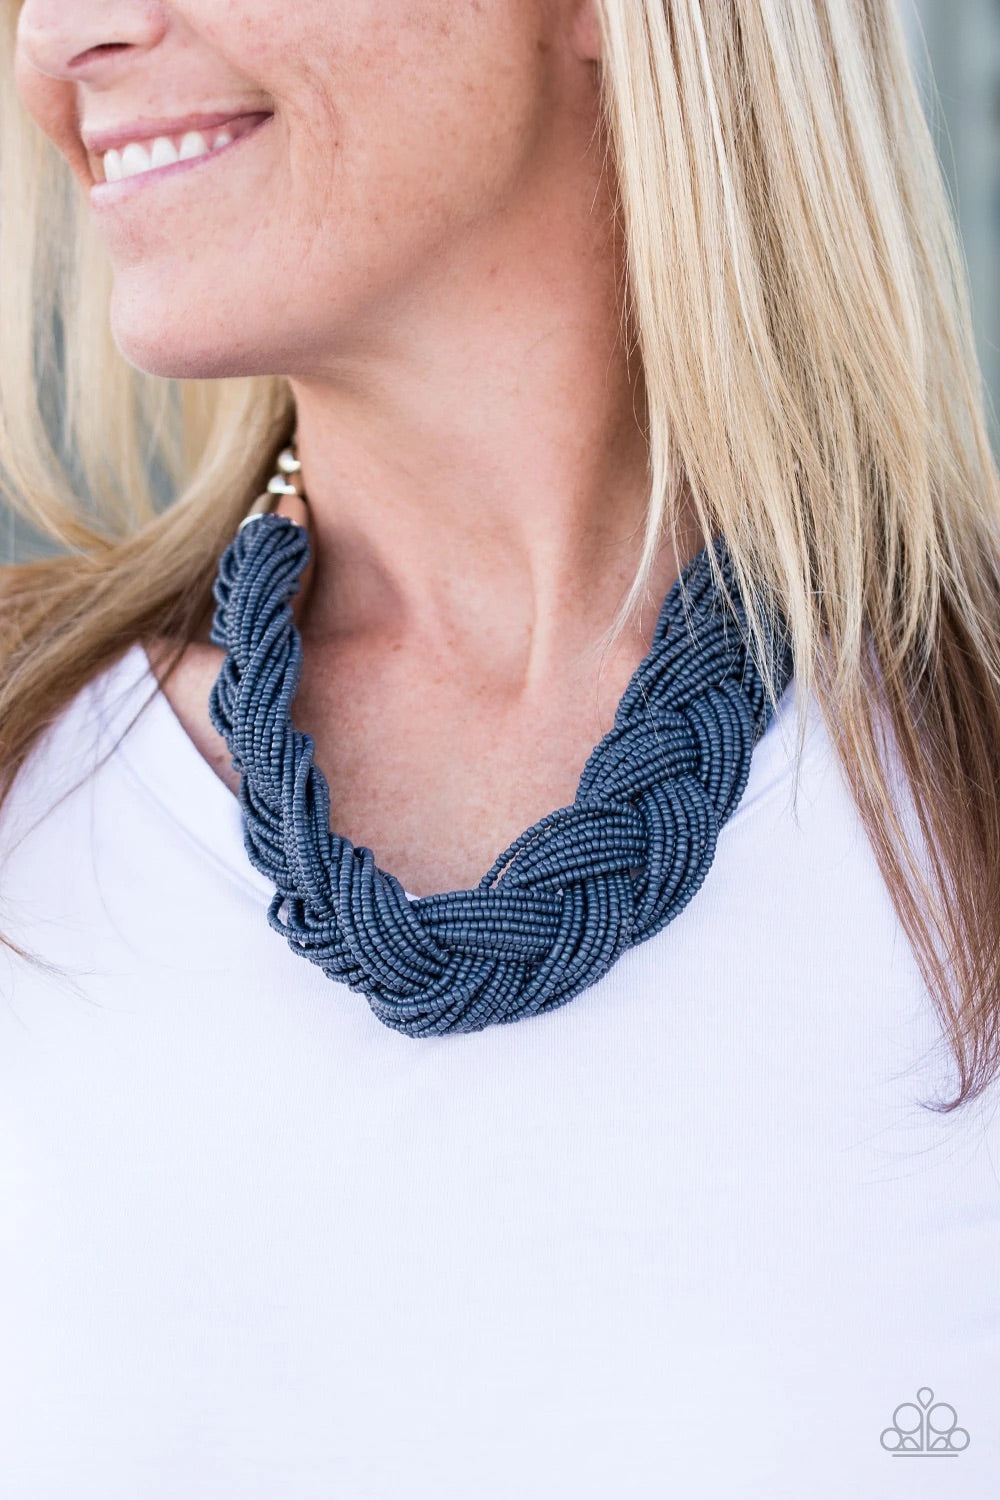 The Great Outback Blue-Necklace